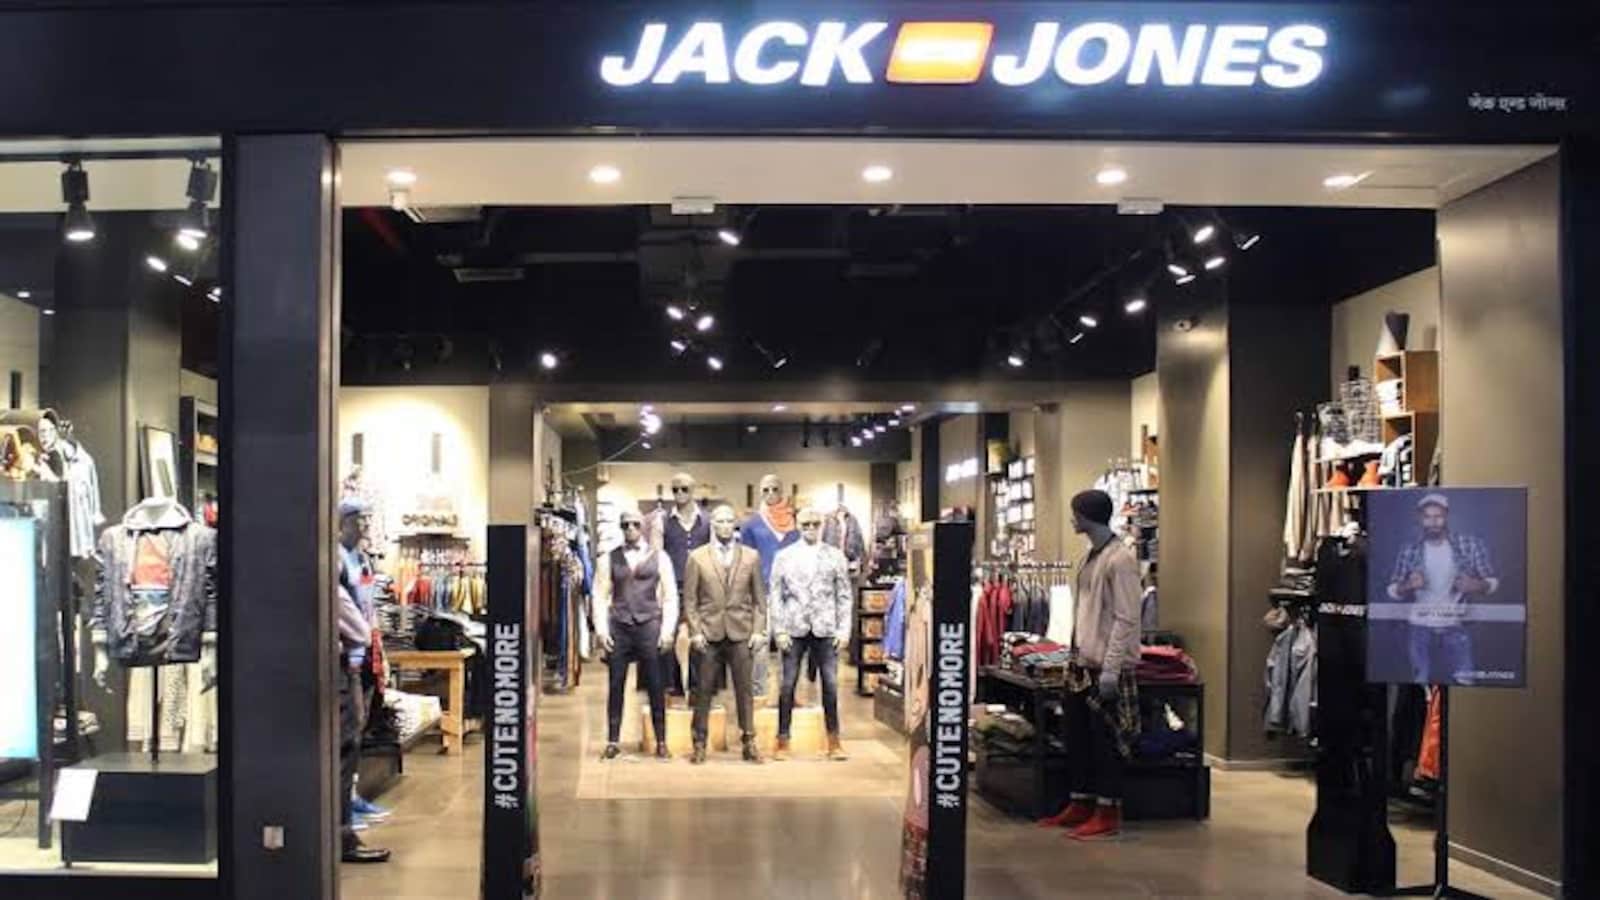 Bestseller India, owner of Jack and Jones brand, concerned over fall in  footfalls